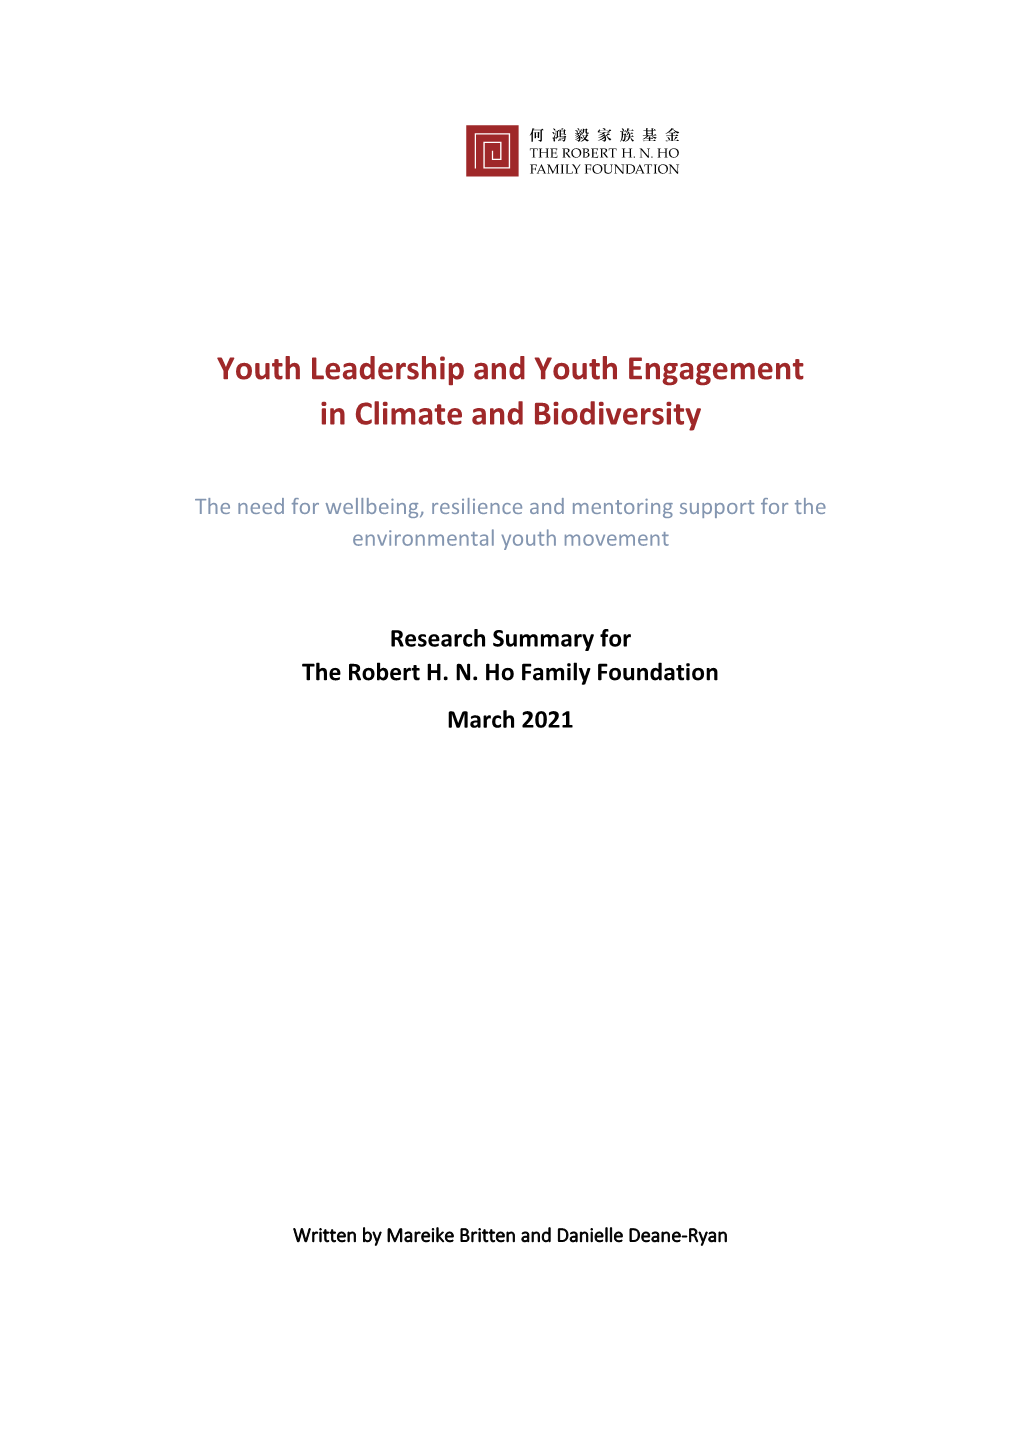 Youth Leadership and Youth Engagement in Climate and Biodiversity